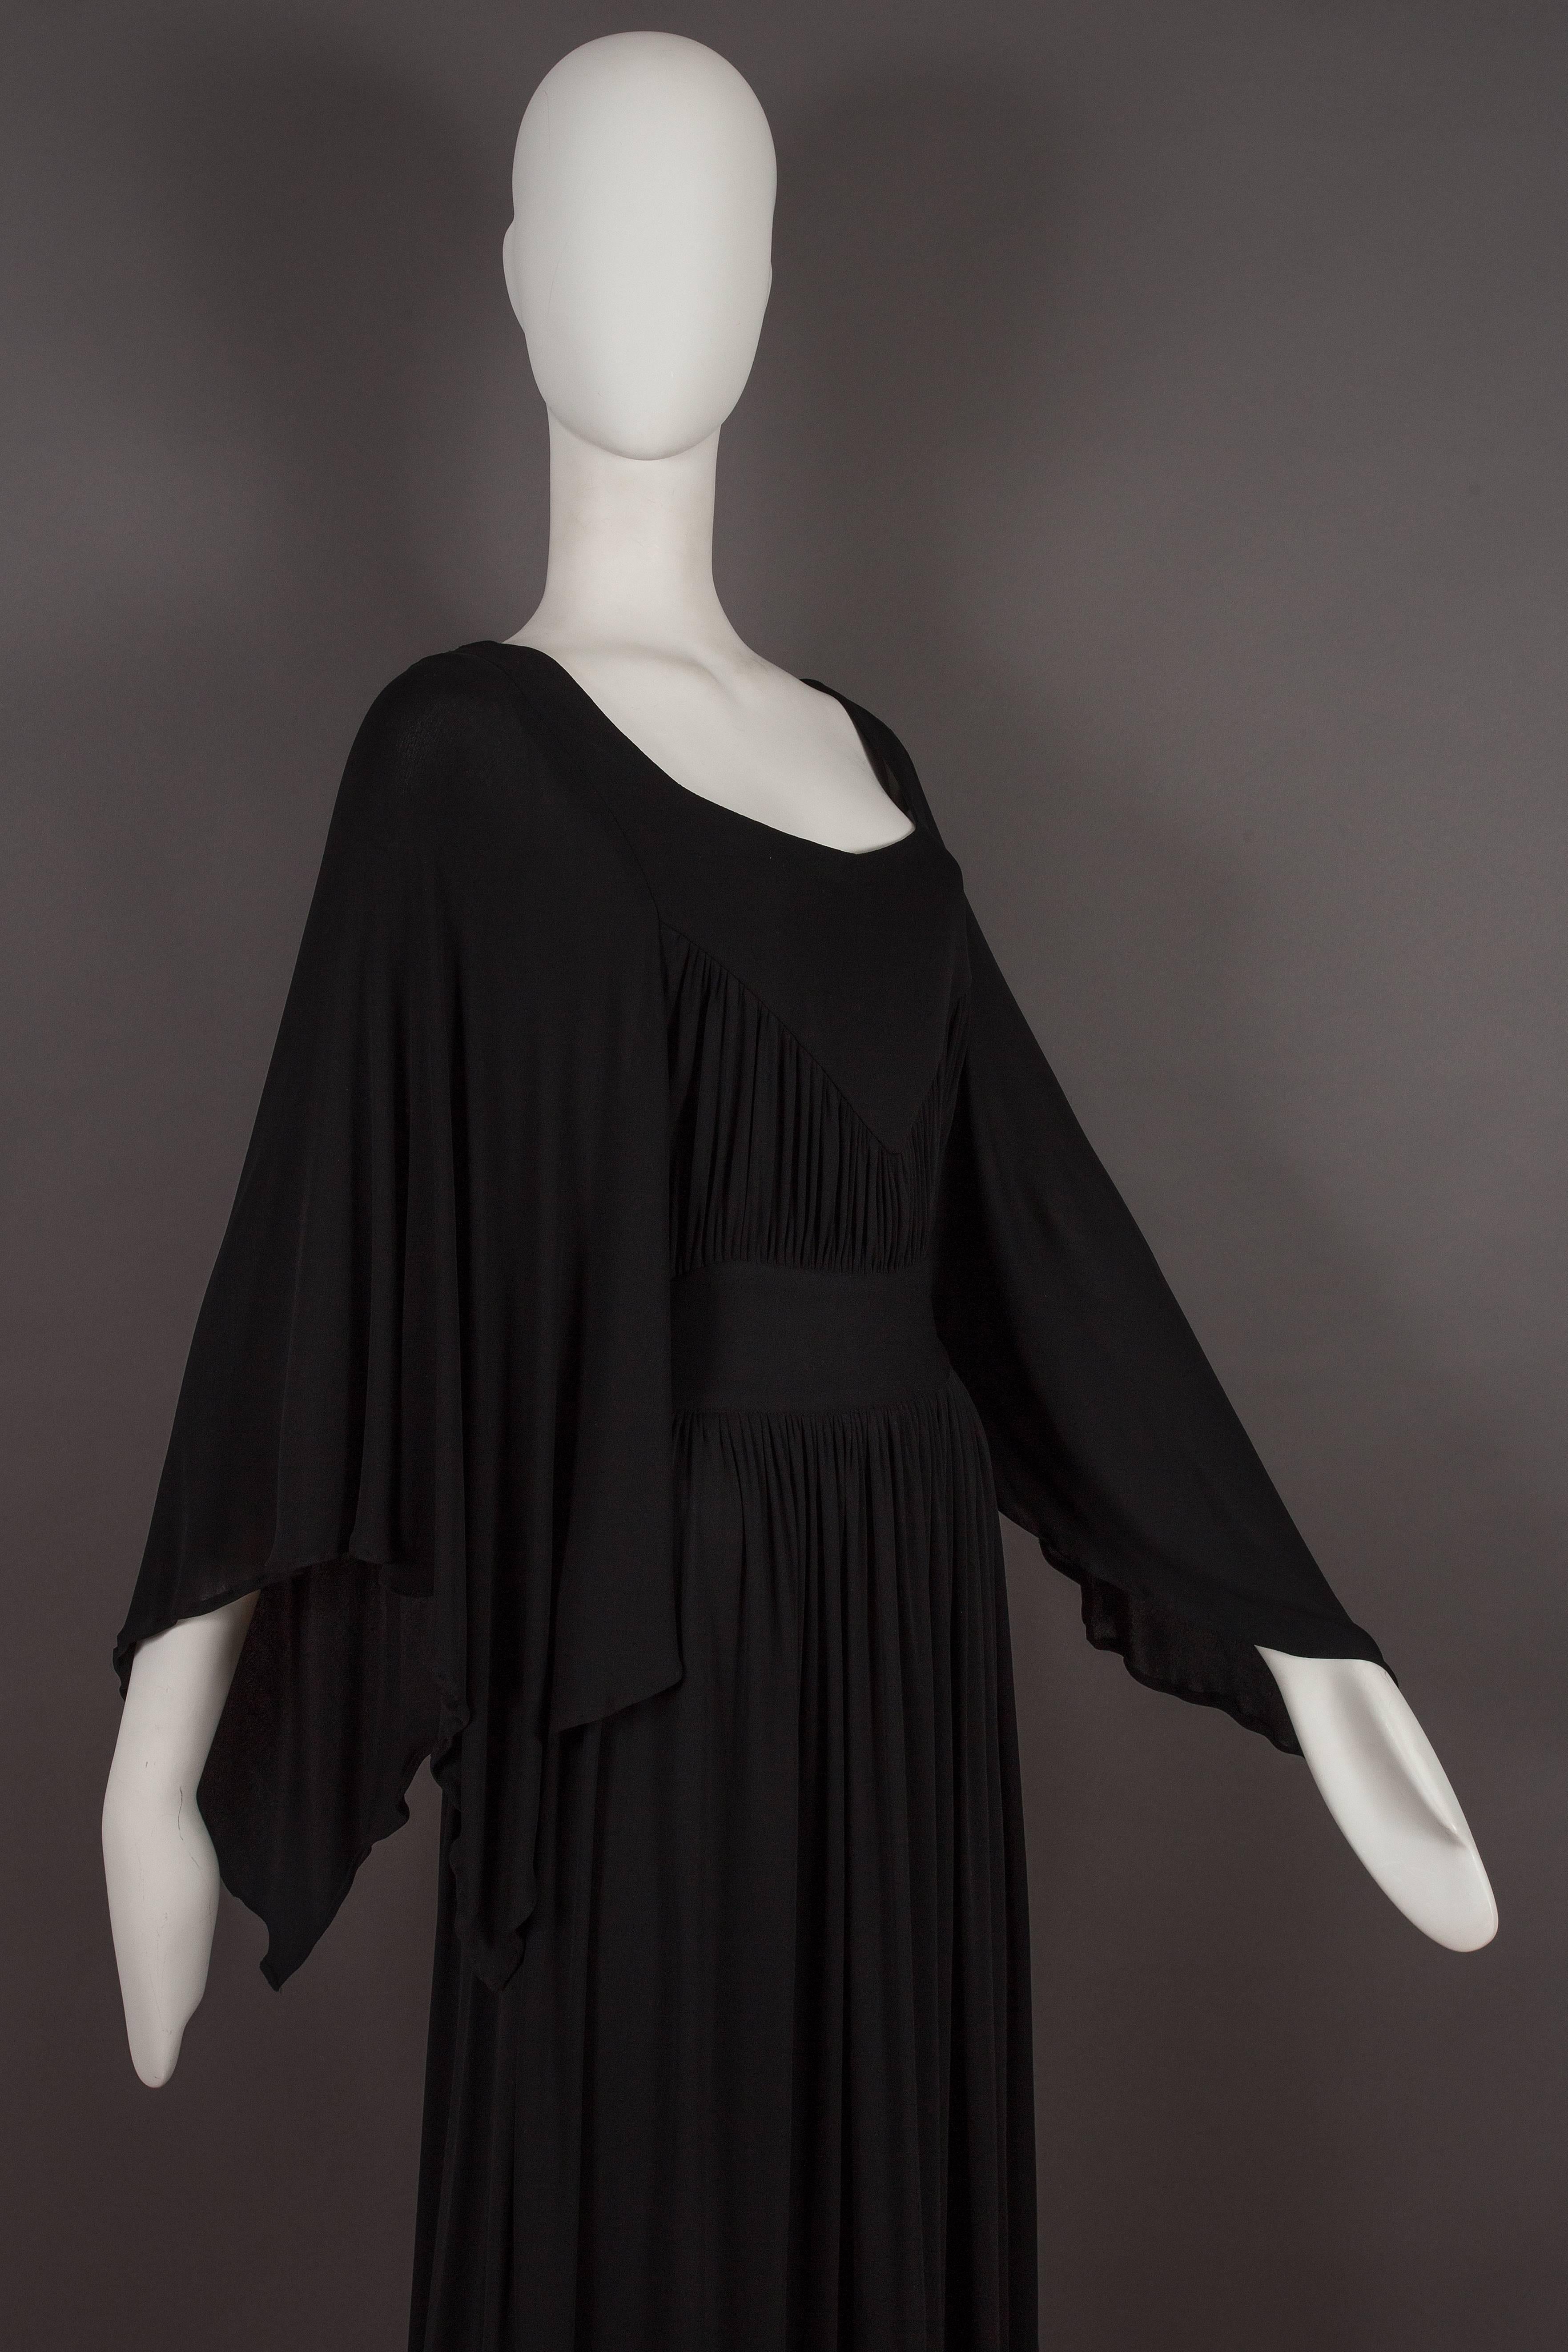 Black Quorum by Ossie Clark pleated black jersey evening gown, circa 1965-68